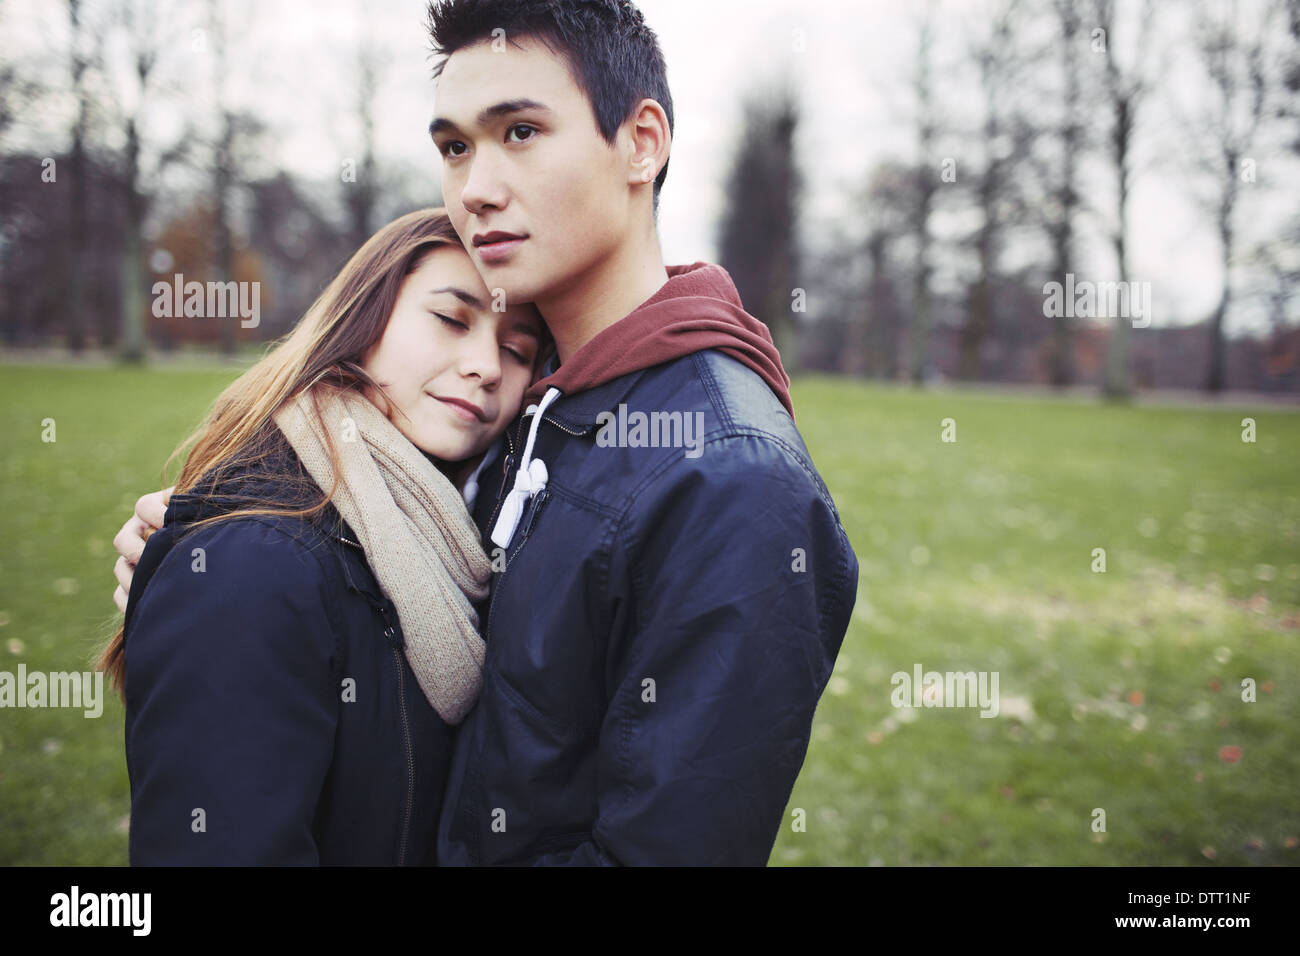 Affectionate teenage couple embracing outdoors. Young man and woman in love in park. Copyspace. Stock Photo